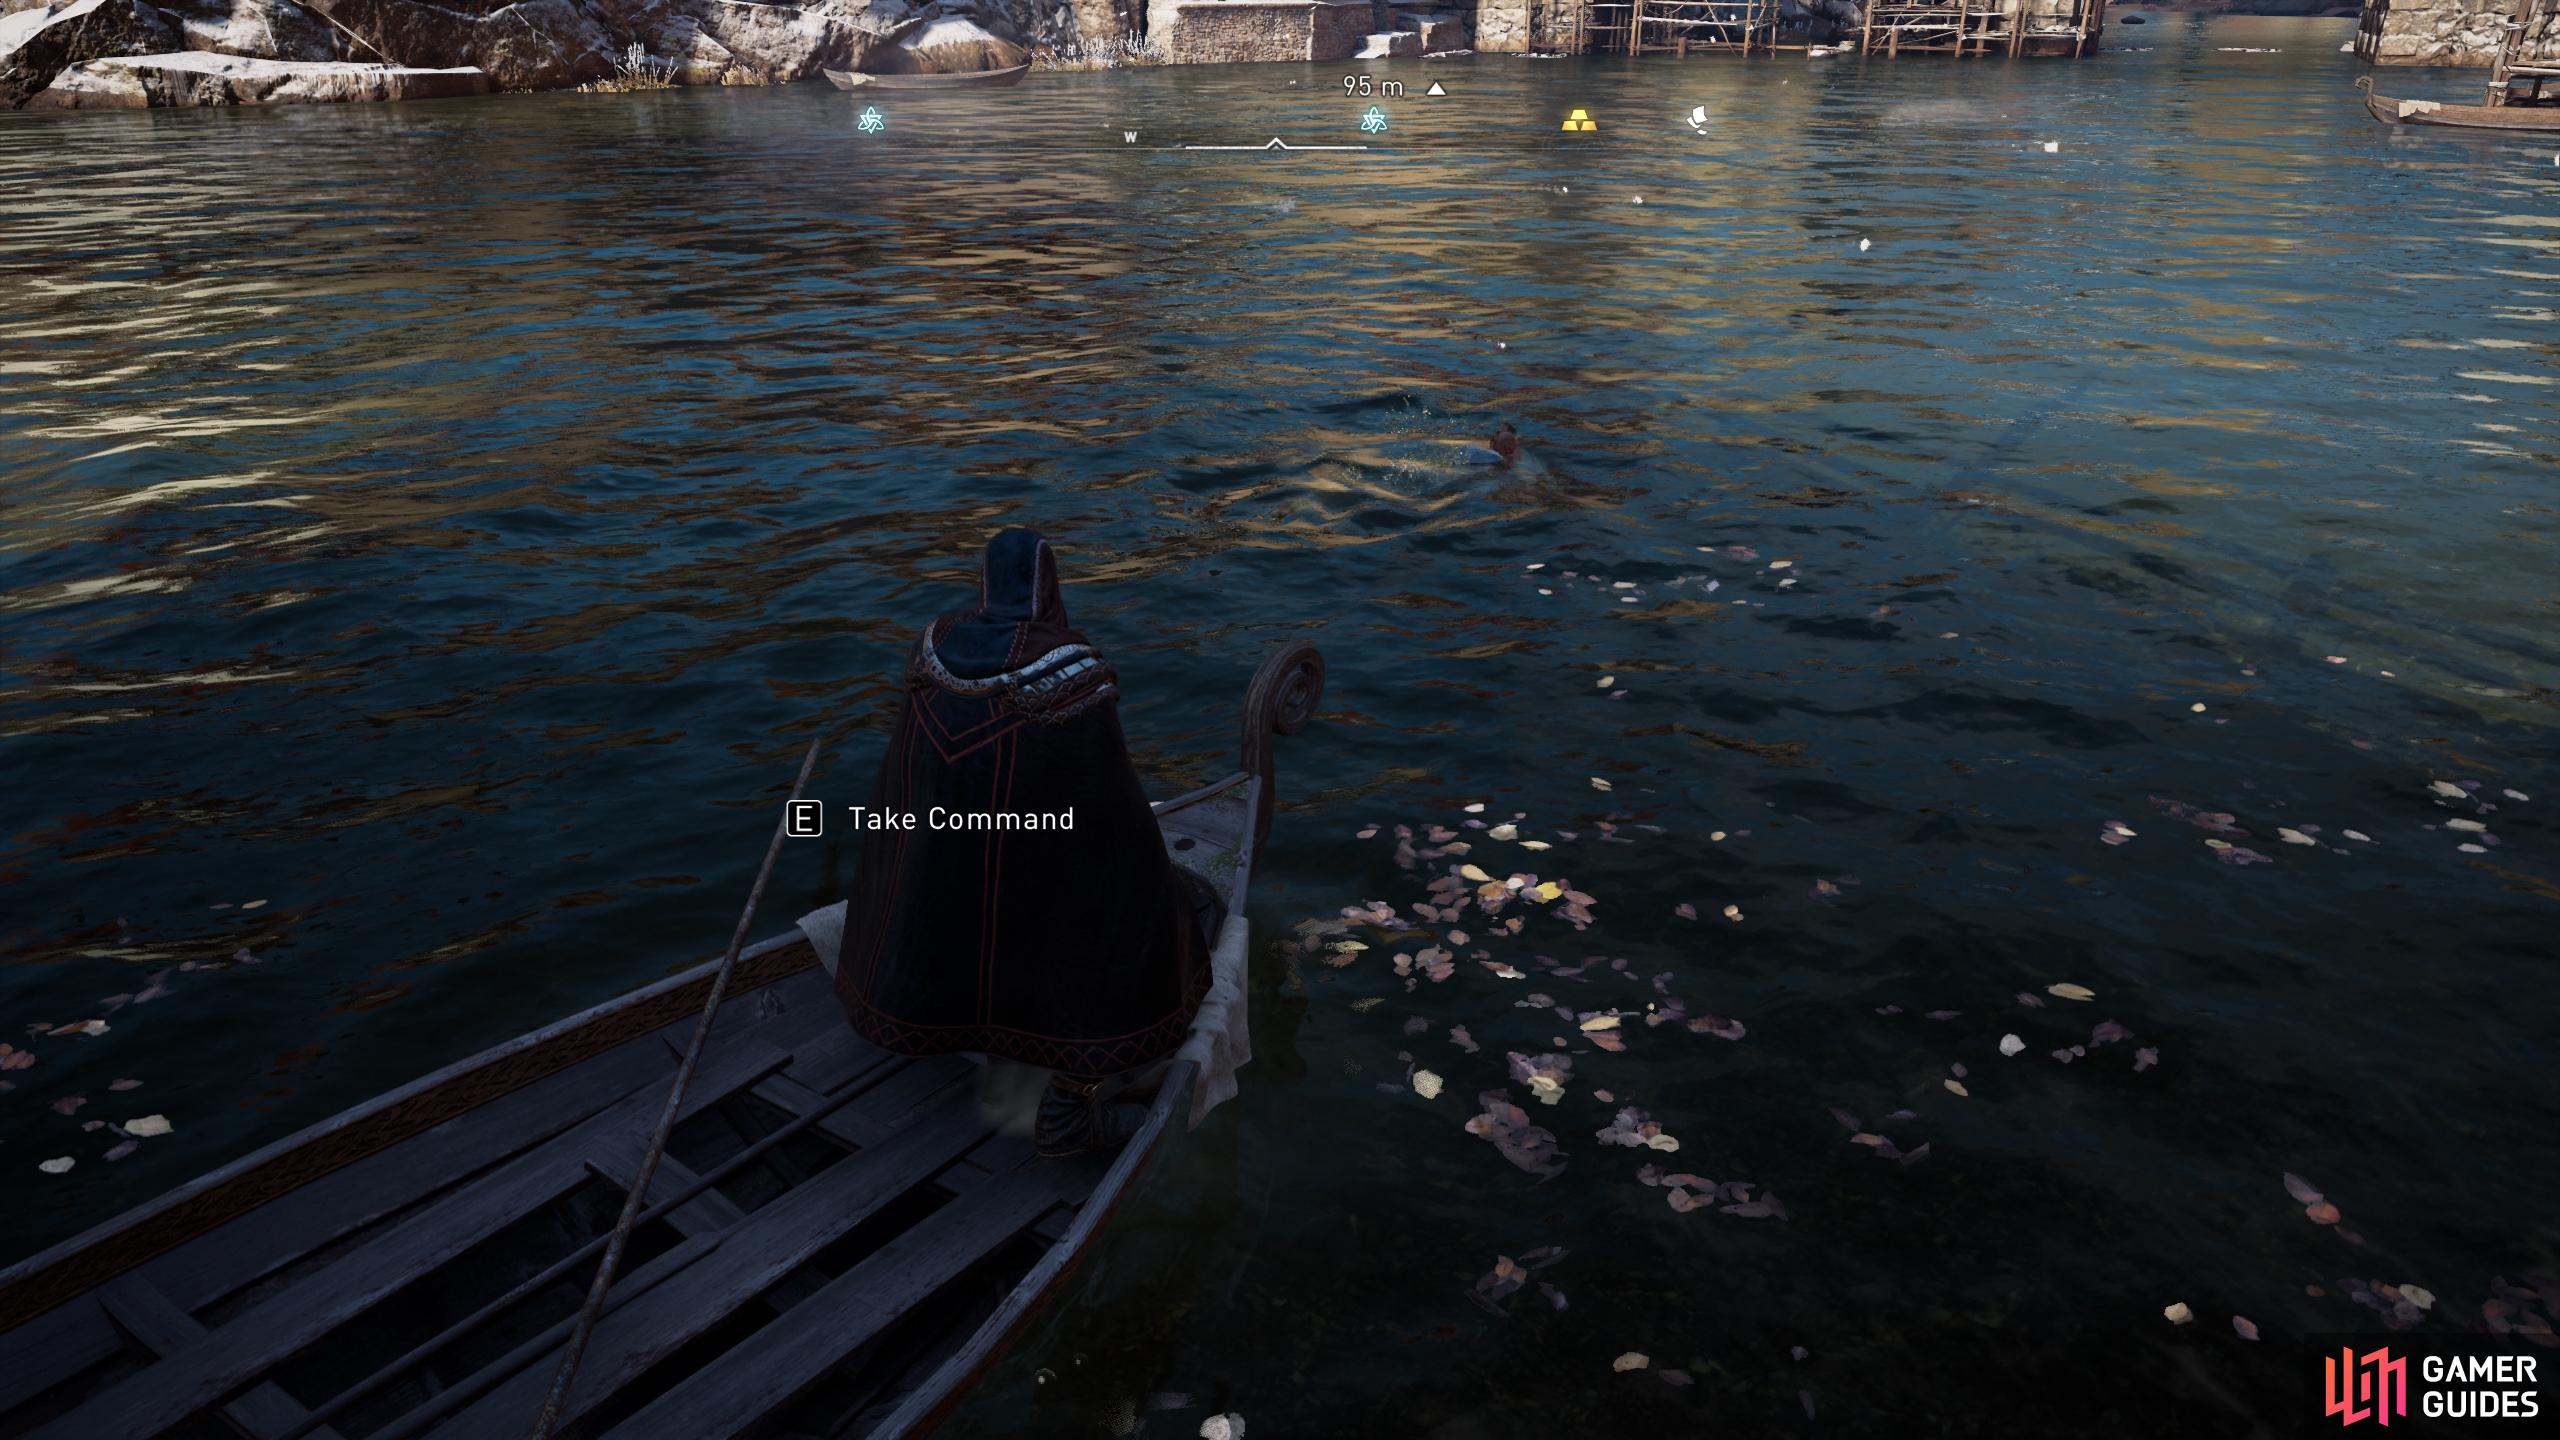 You can force the man into the water by stealing his boat.